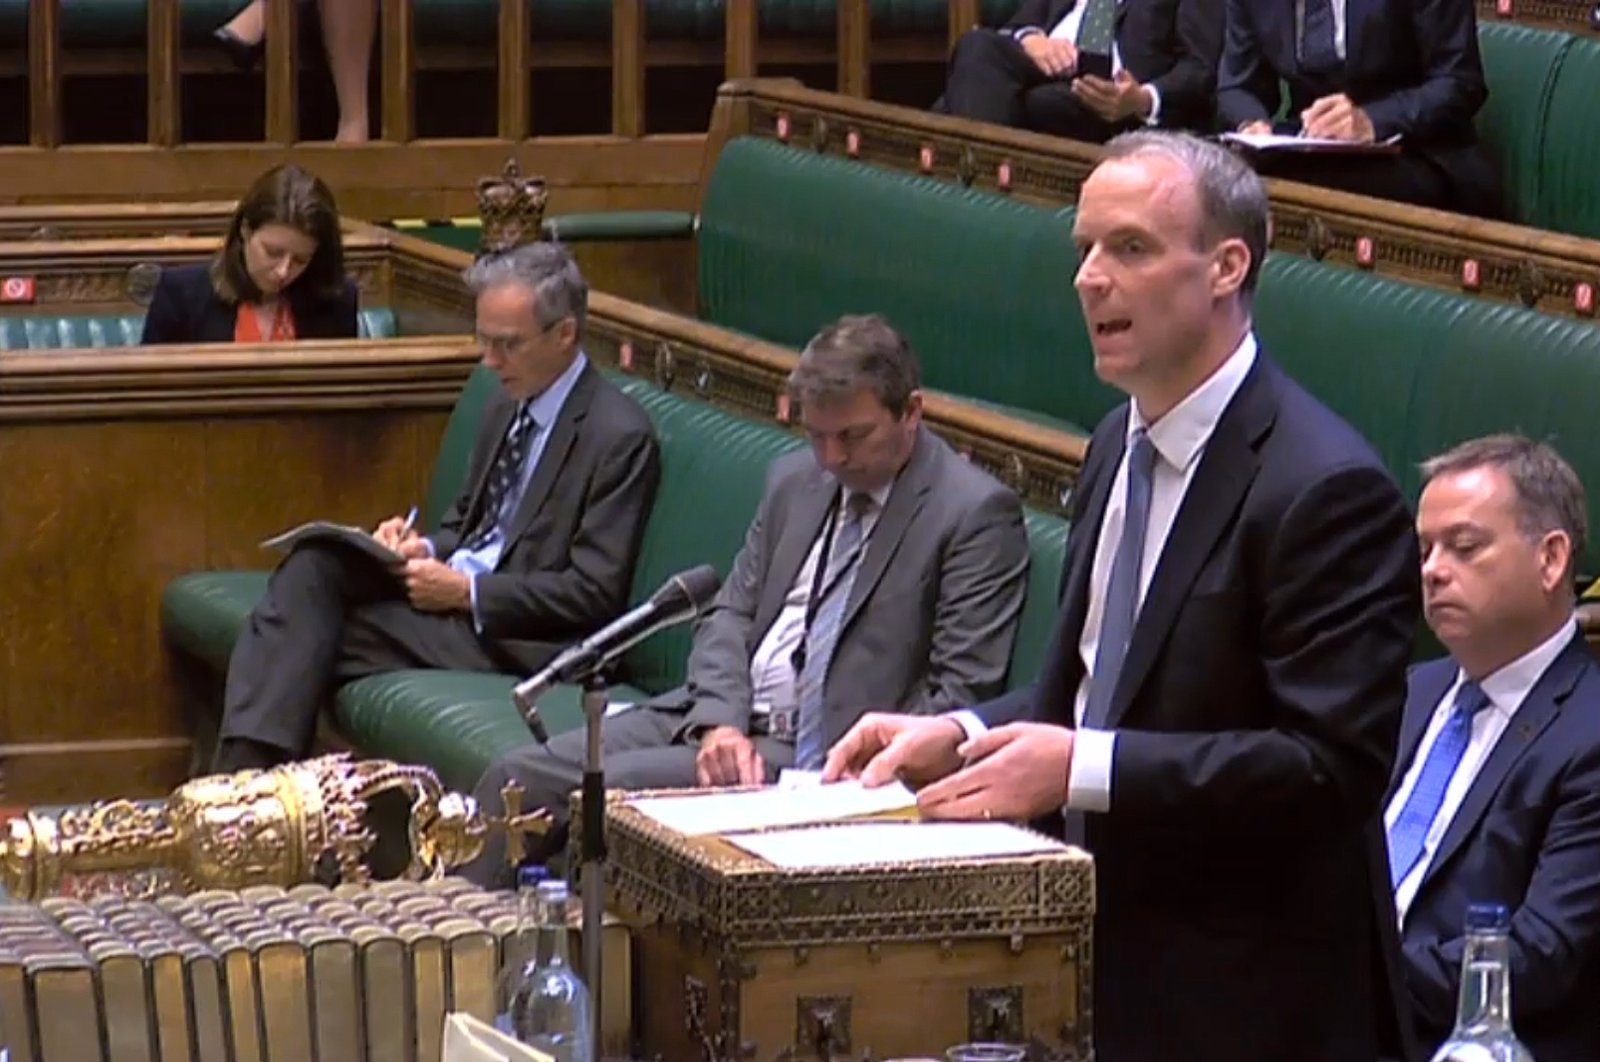 Britain's Foreign Secretary Dominic Raab makes a statement in the House of Commons in London, Britain, July 20, 2020. (AFP Photo)